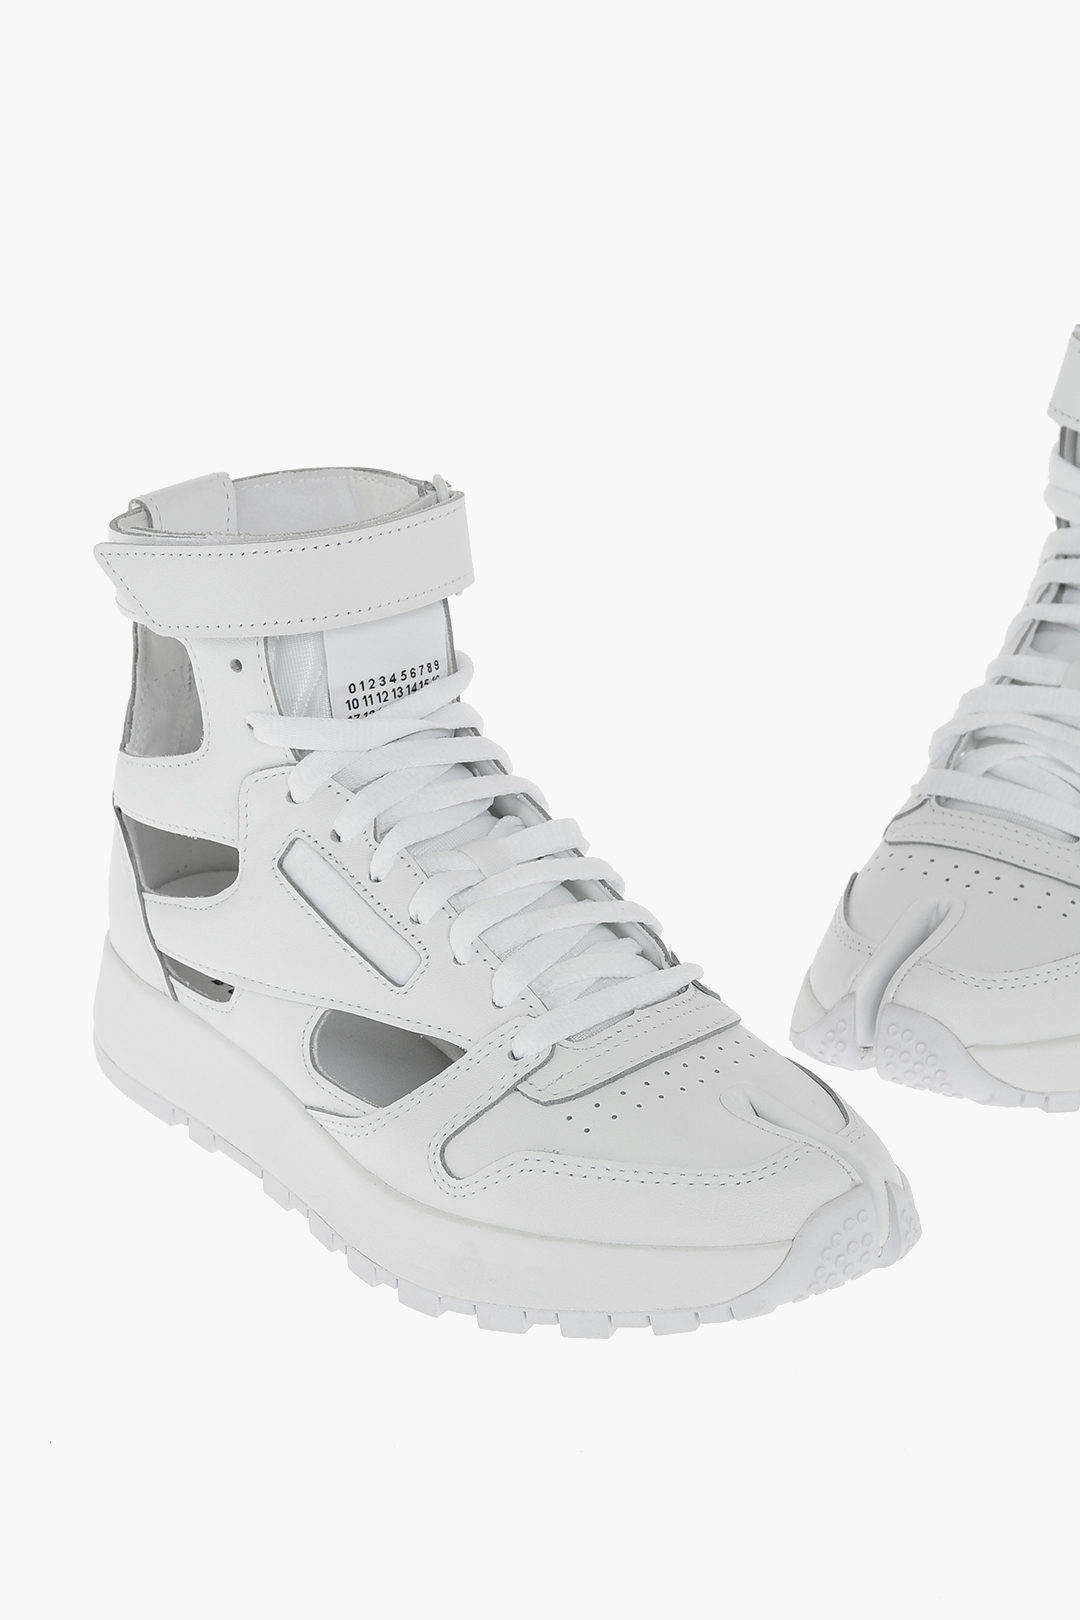 MM22 REEBOK leather TABI PROJECT 0 CL GL high top sneakers with cut out  details